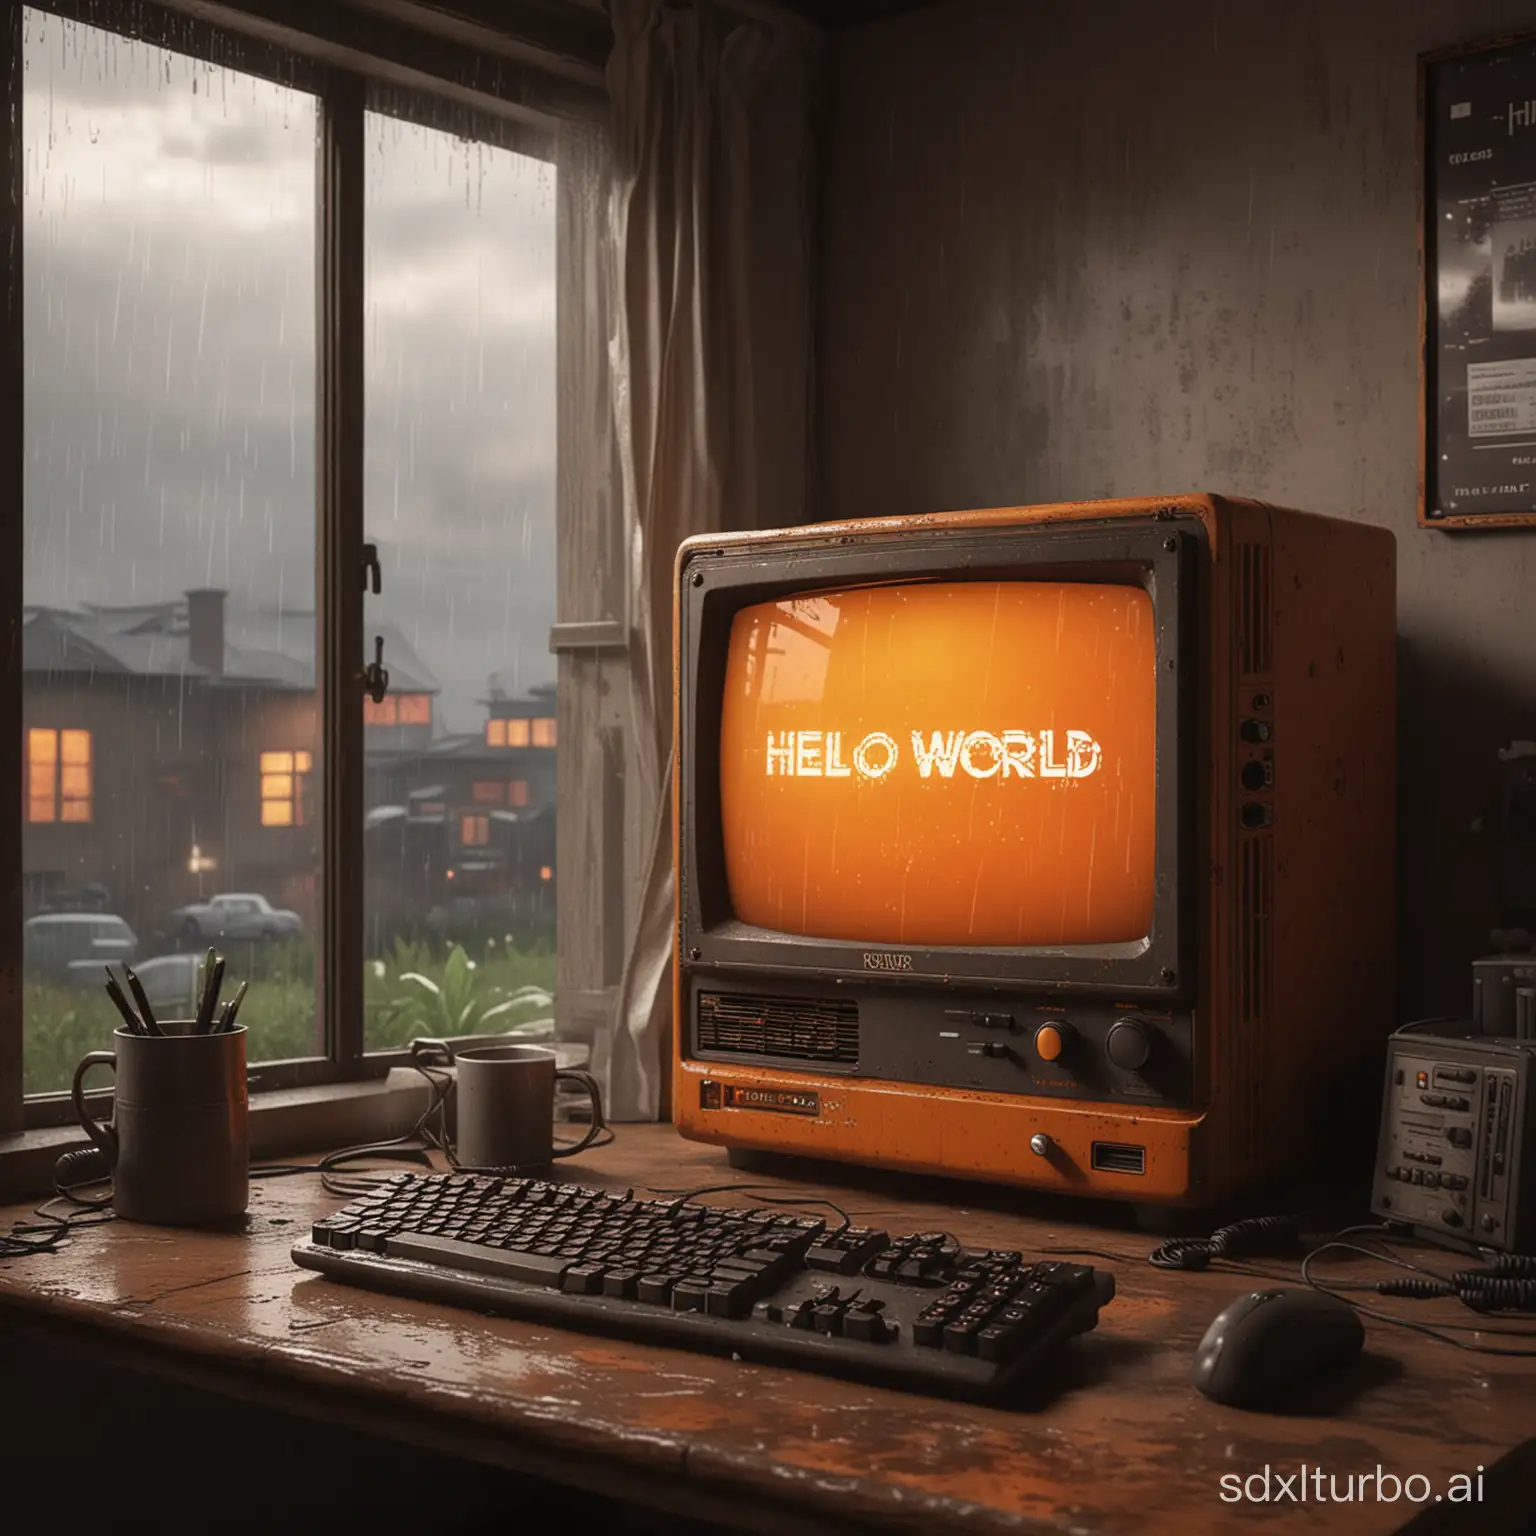 a retro pc in a dystopian house, with the text "hello world" on pc display. the windows are open and the weather is rainy with dark clouds. orange pc display, realistic, 8k, cinematic